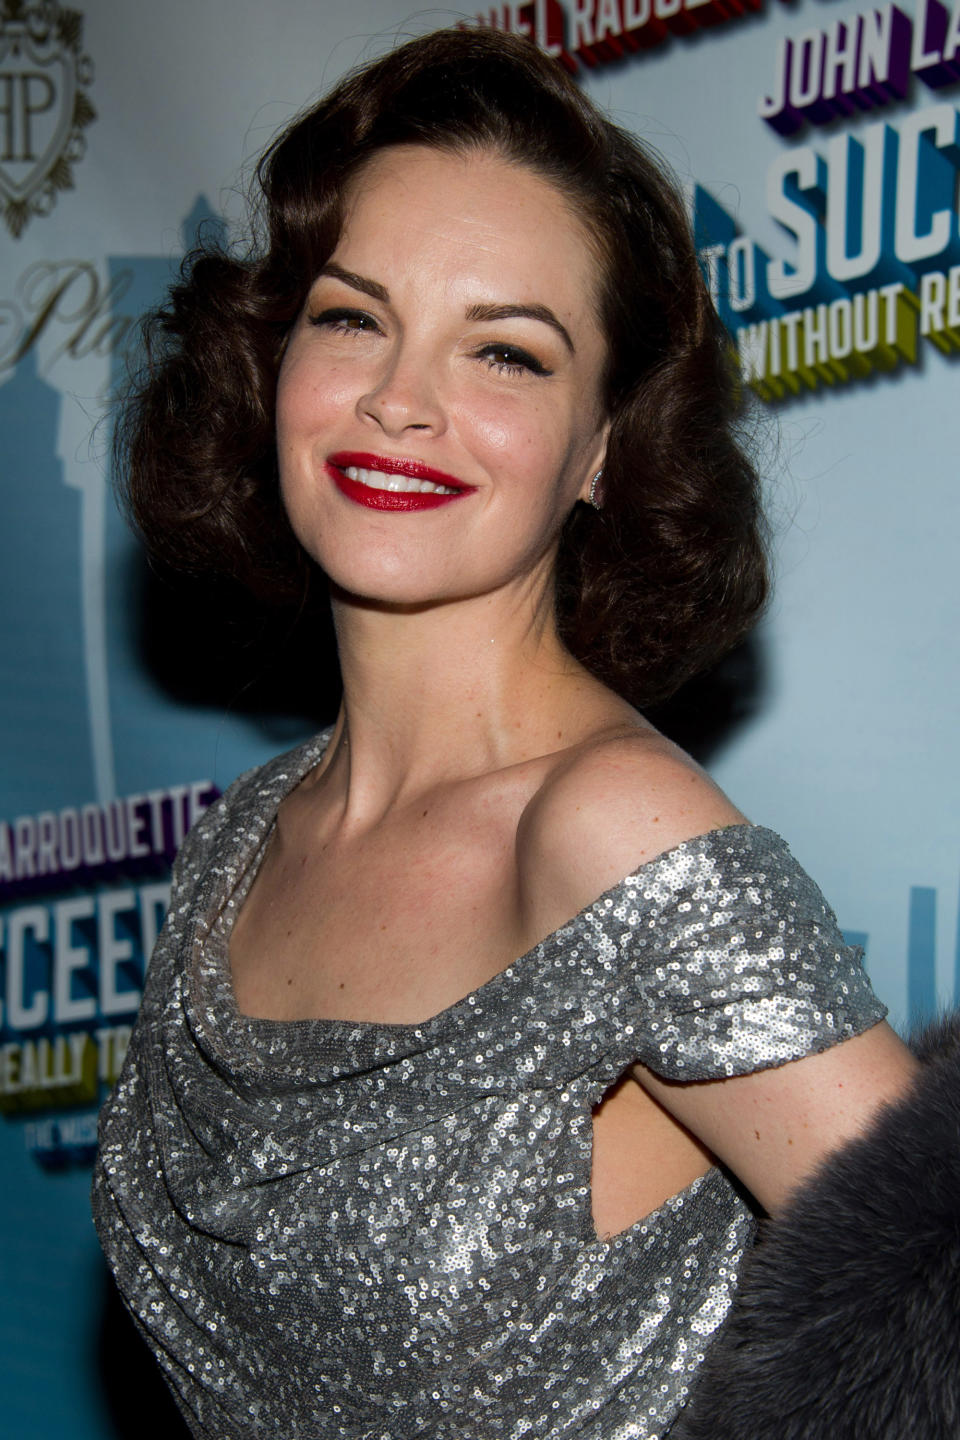 FILE - In this March 27, 2011 file photo, actress Tammy Blanchard arrives to the opening night after party for "How to Succeed in Business Without Really Trying" in New York. Blanchard portrayed Judy Garland in a 2001 TV mini-series called "Life With Judy Garland: Me And My Shadows." (AP Photo/Charles Sykes, file)